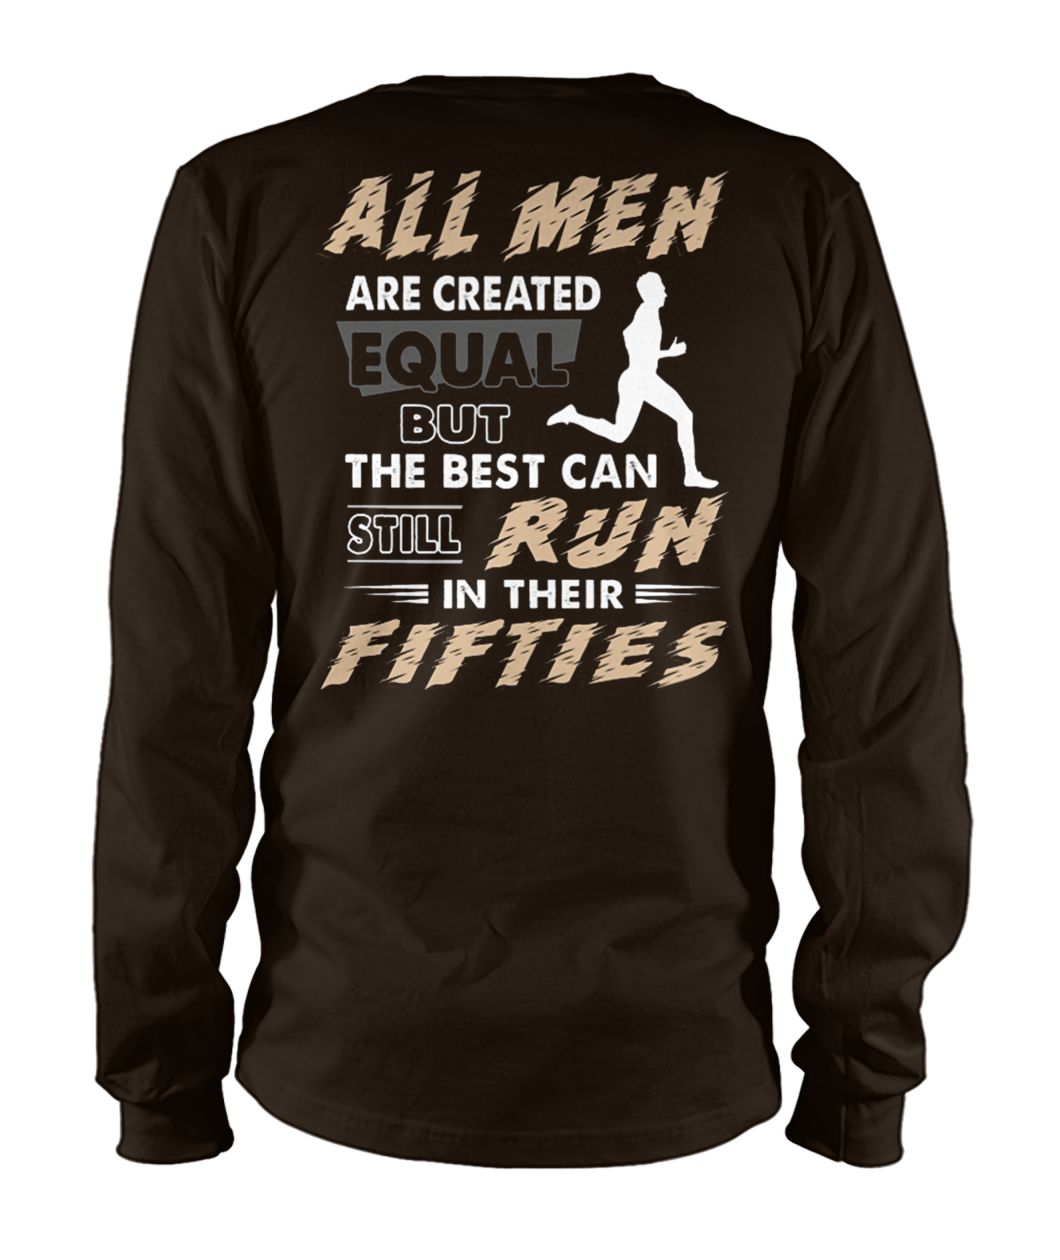 All men are created equal but the best can still run in their fifties unisex long sleeve